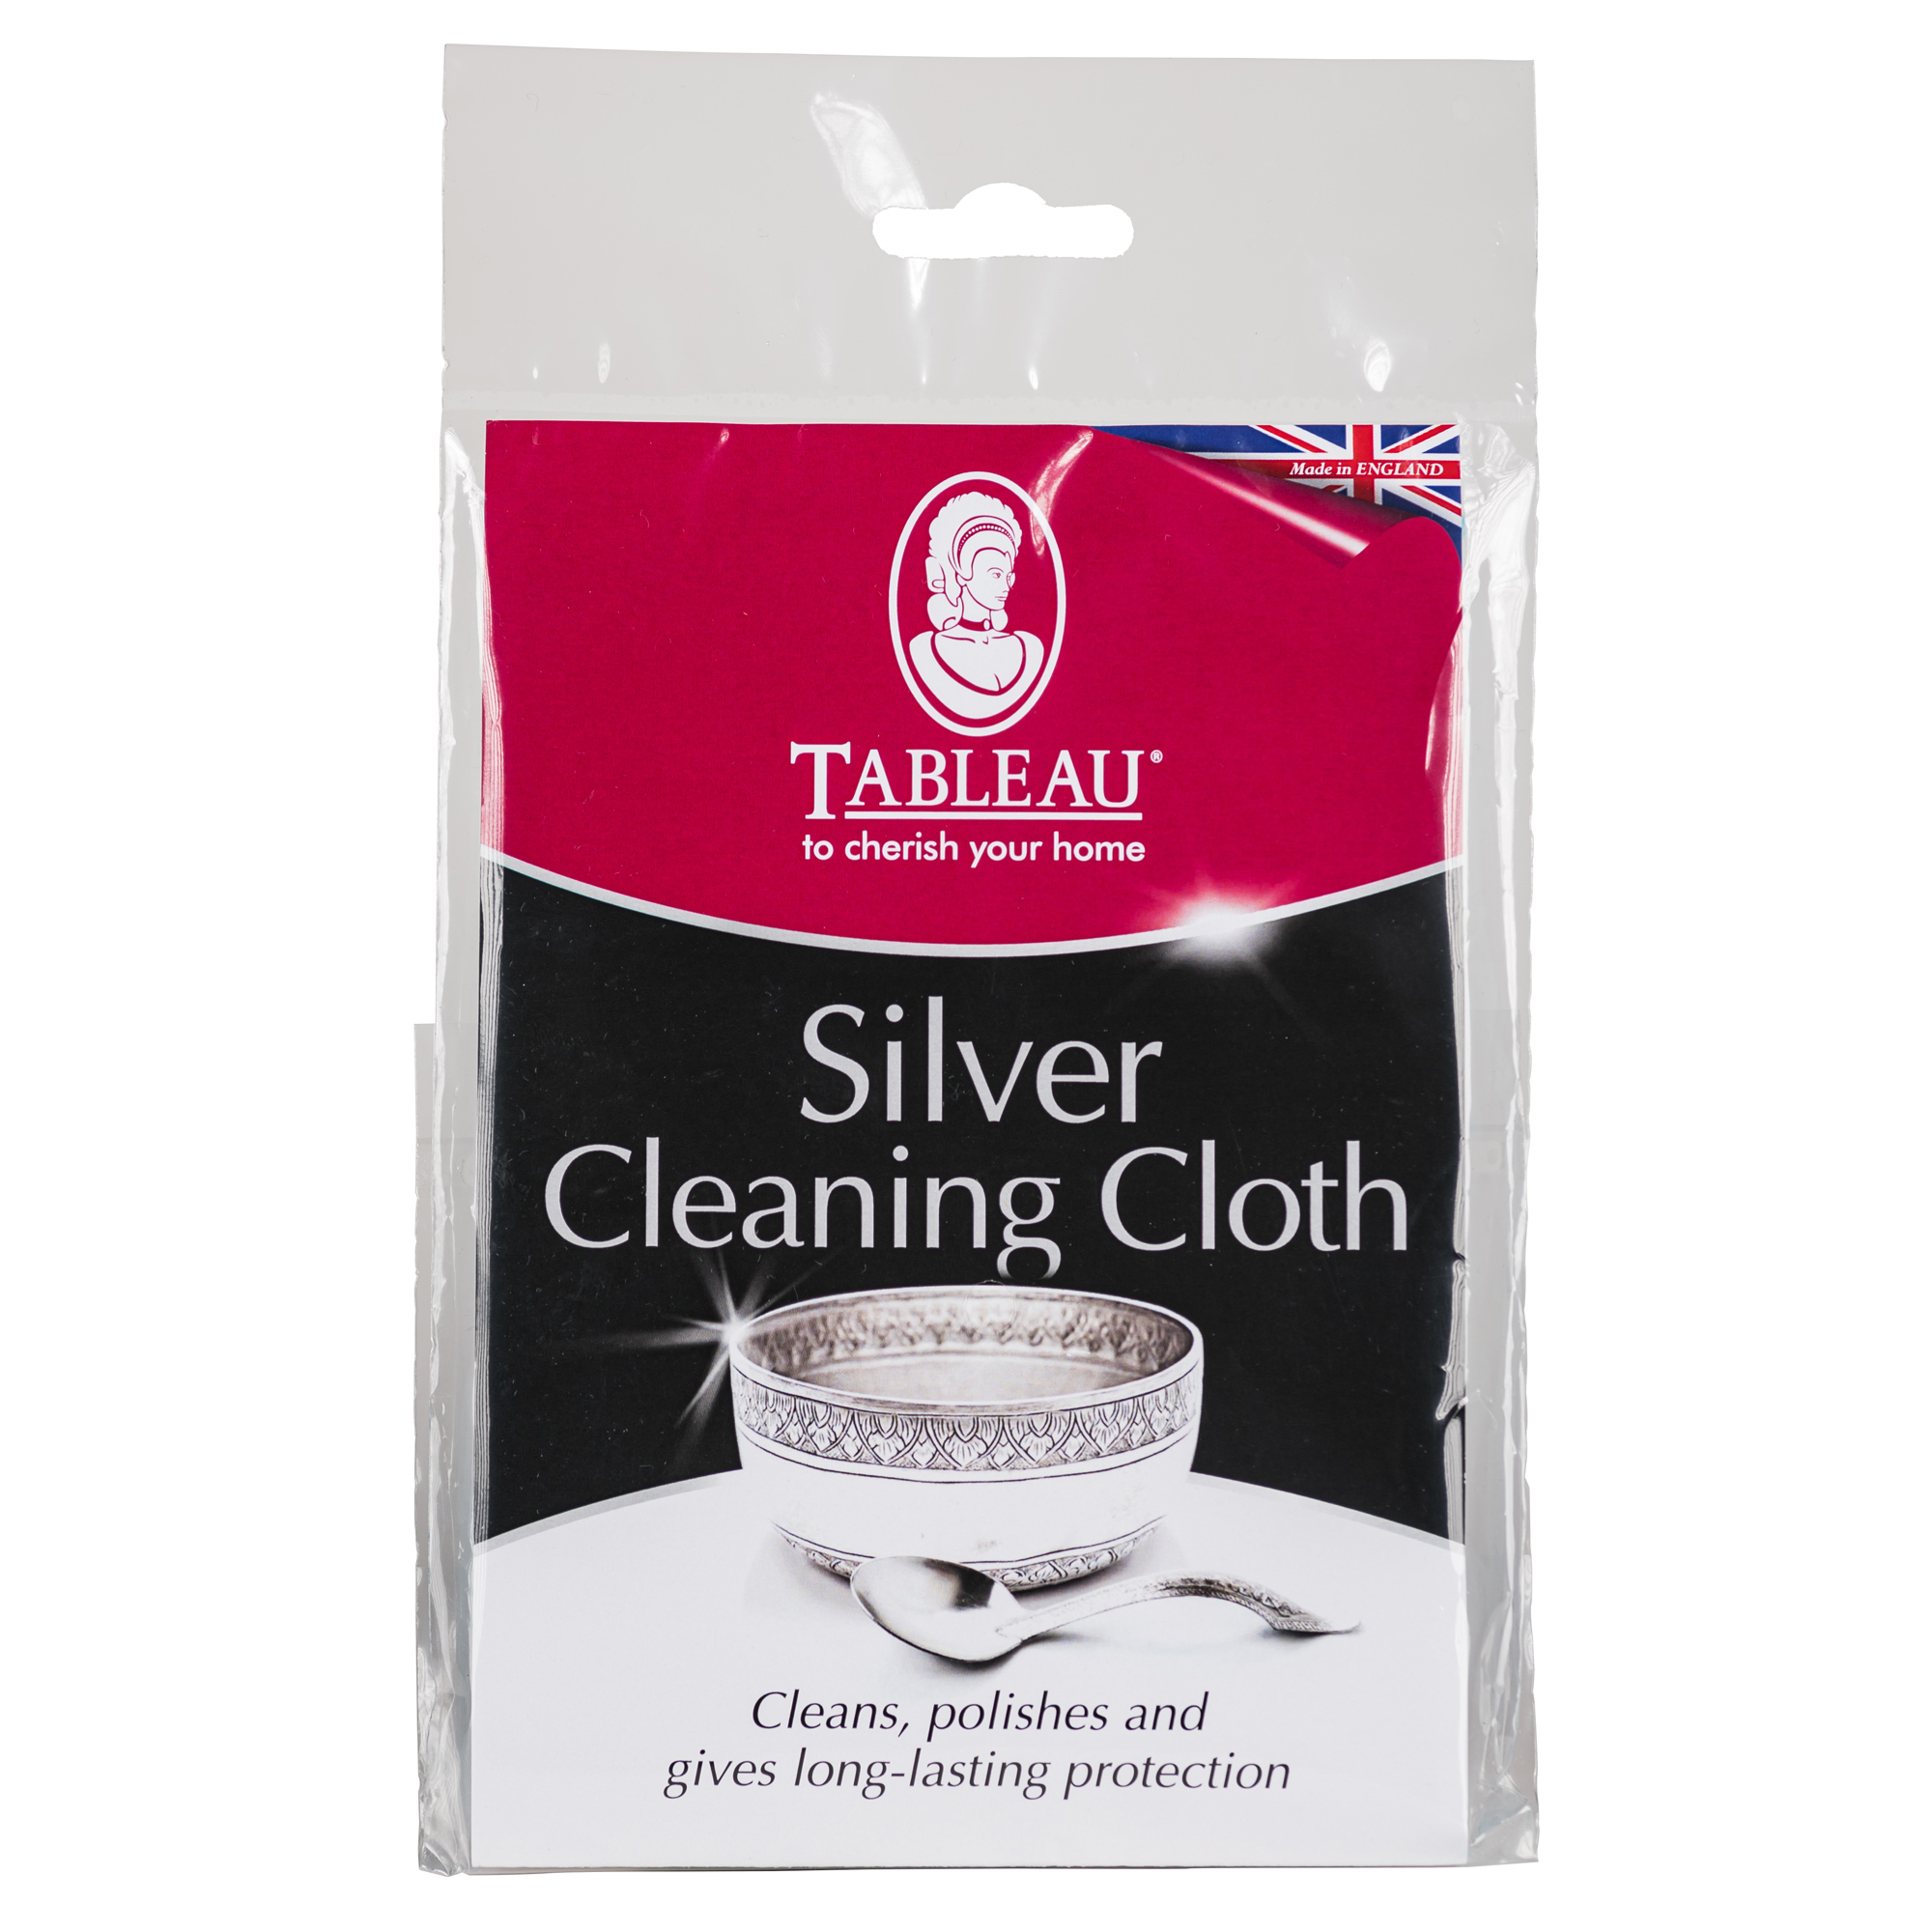 Silver Cleaning Cloth, Silver Cleaning Products, UK